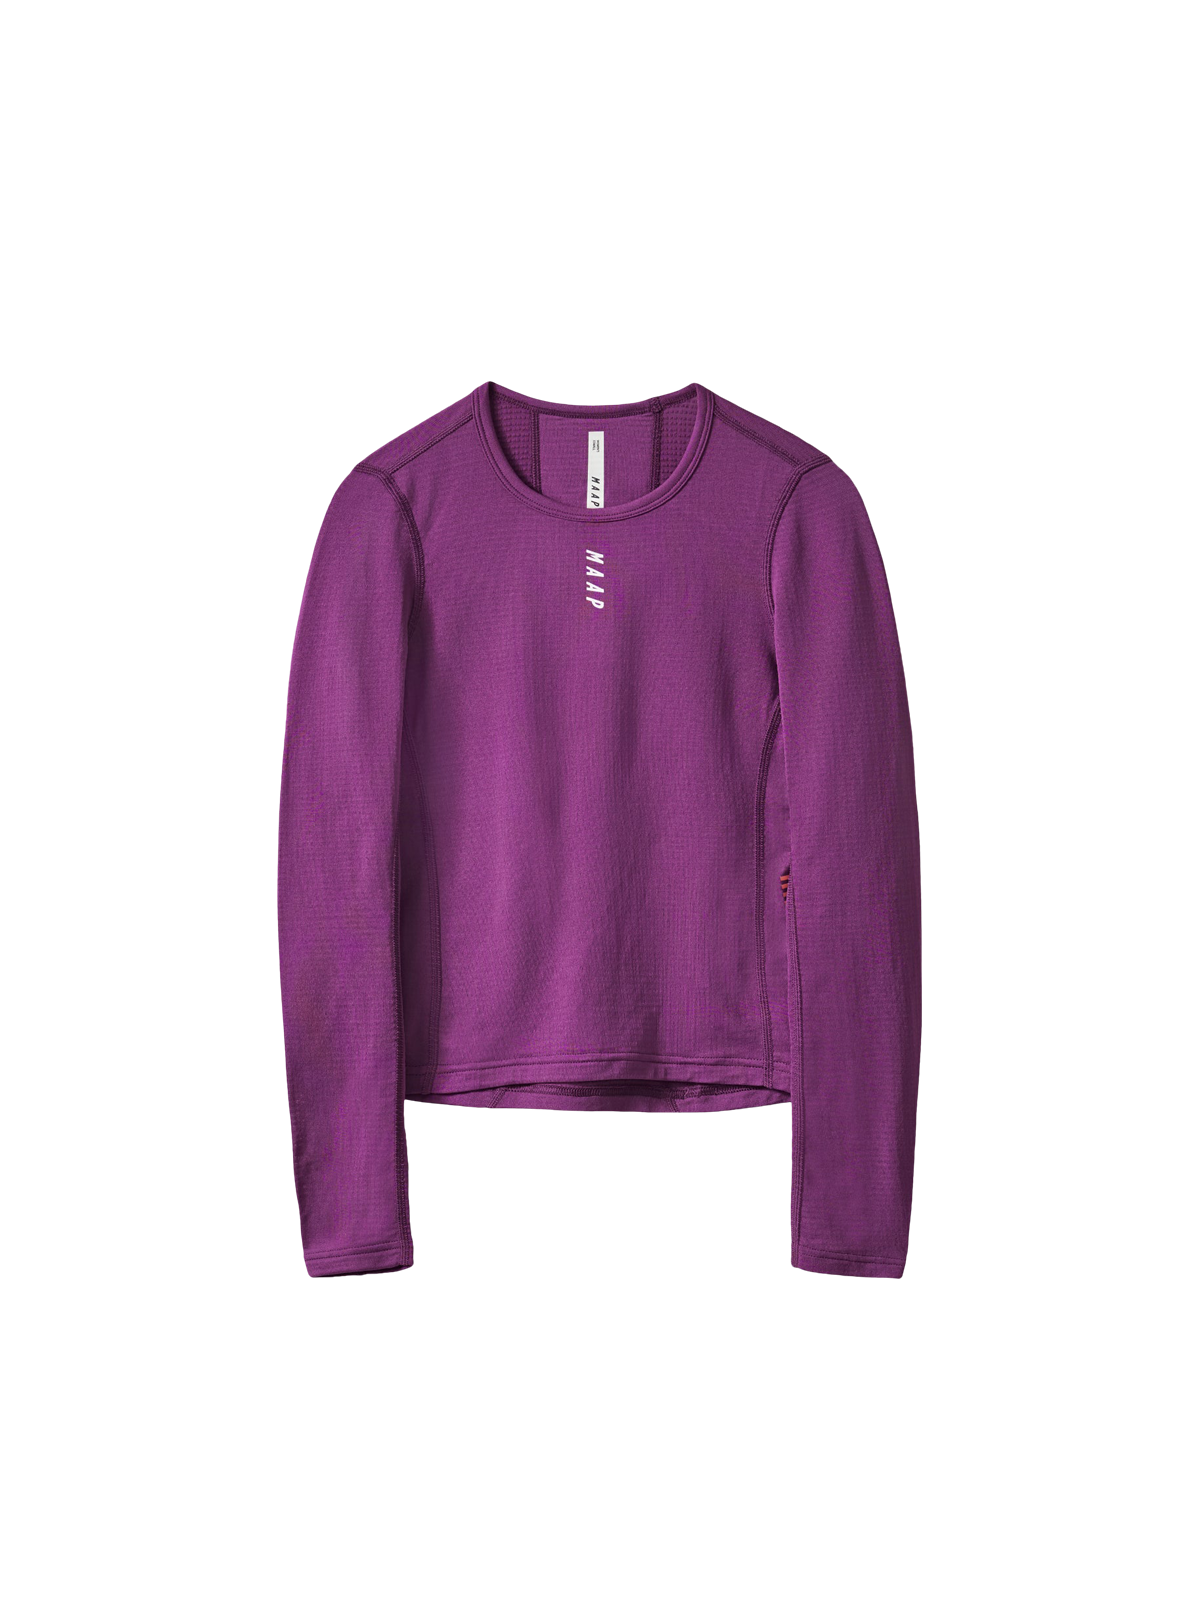 Women's Thermal Base Layer LS Tee - MAAP Cycling Apparel